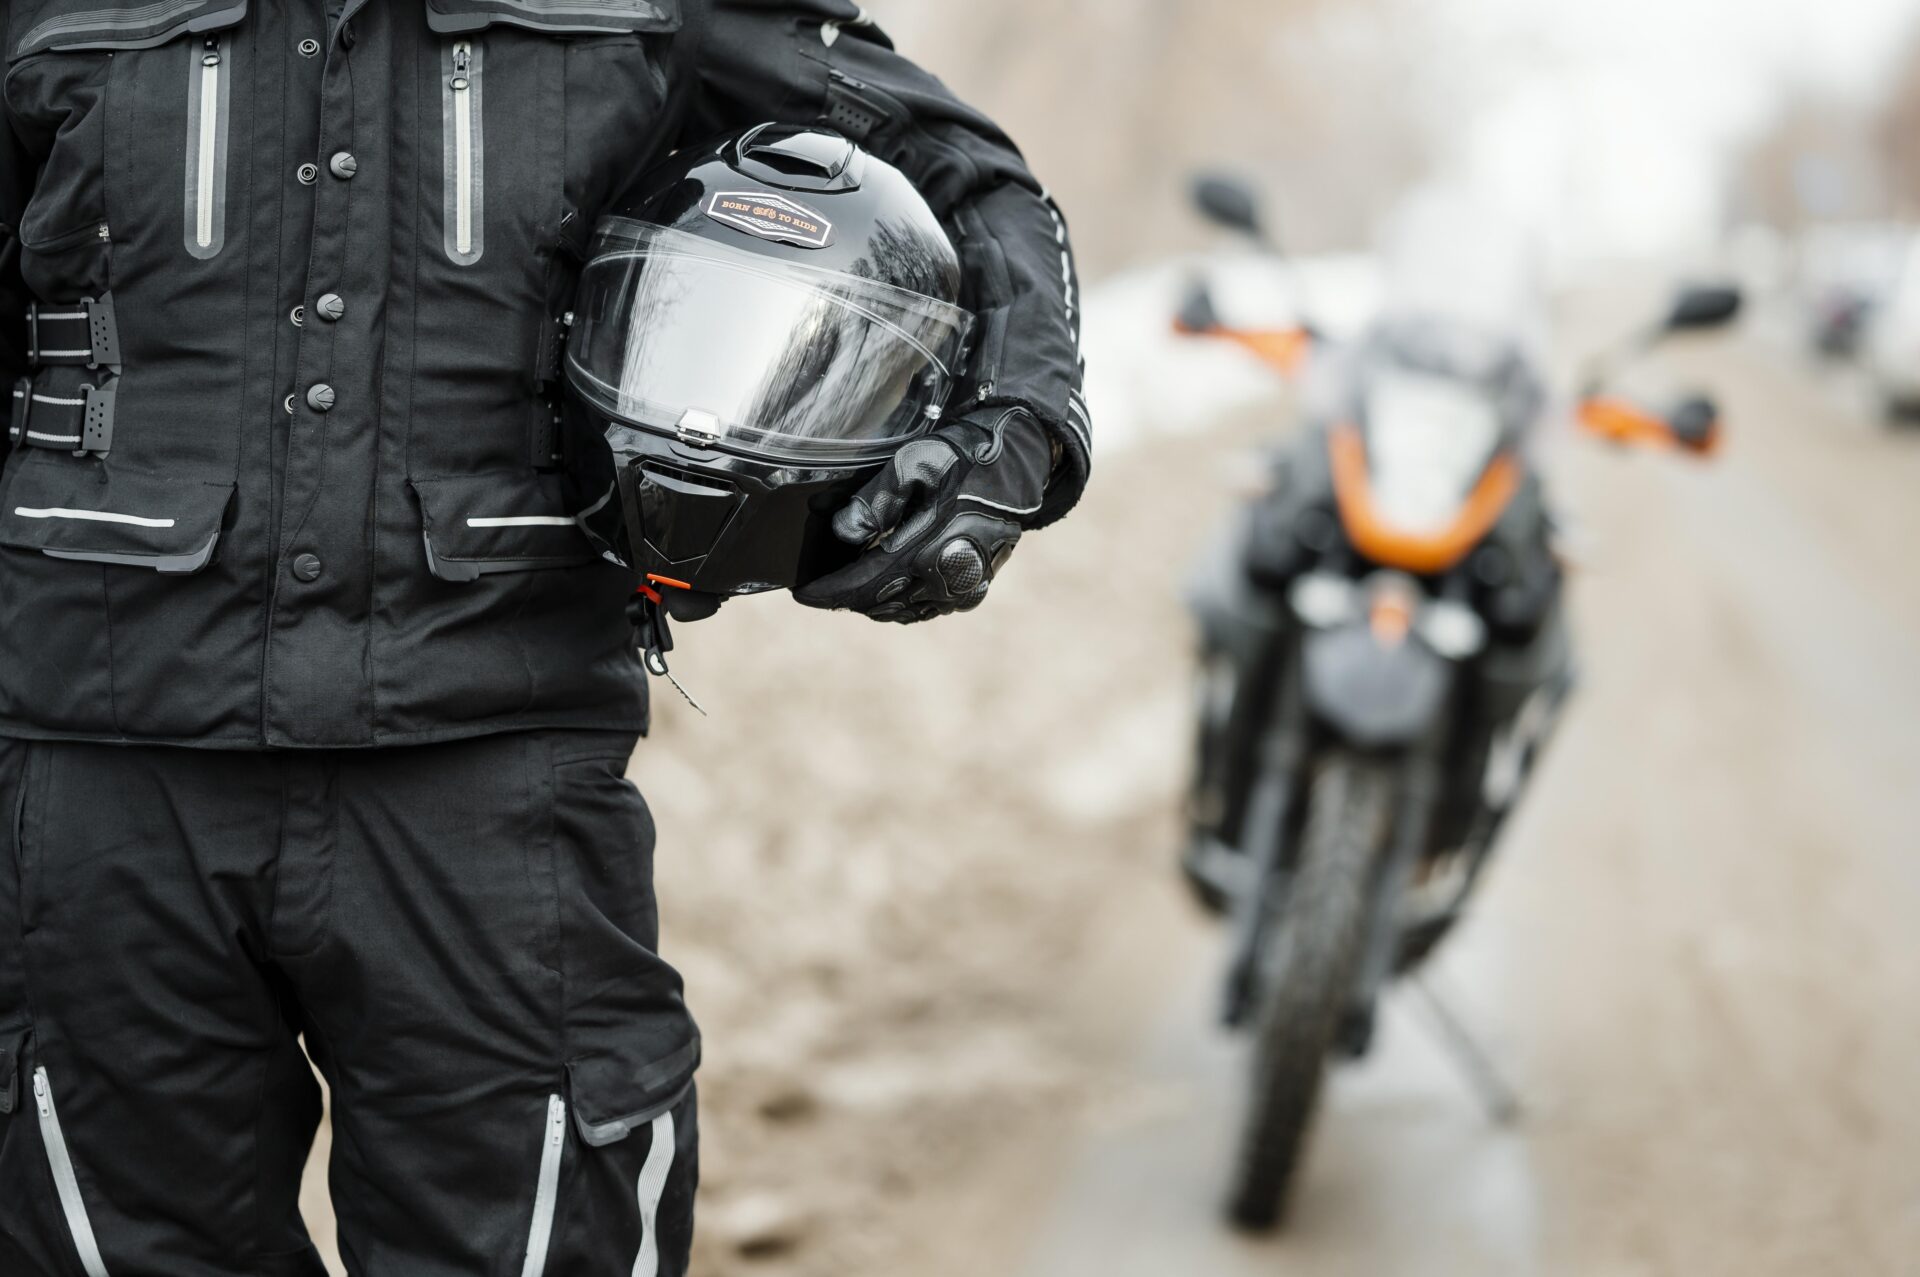 Motorcycle Rain Gear: A Safety Companion or a Fashion Trend?